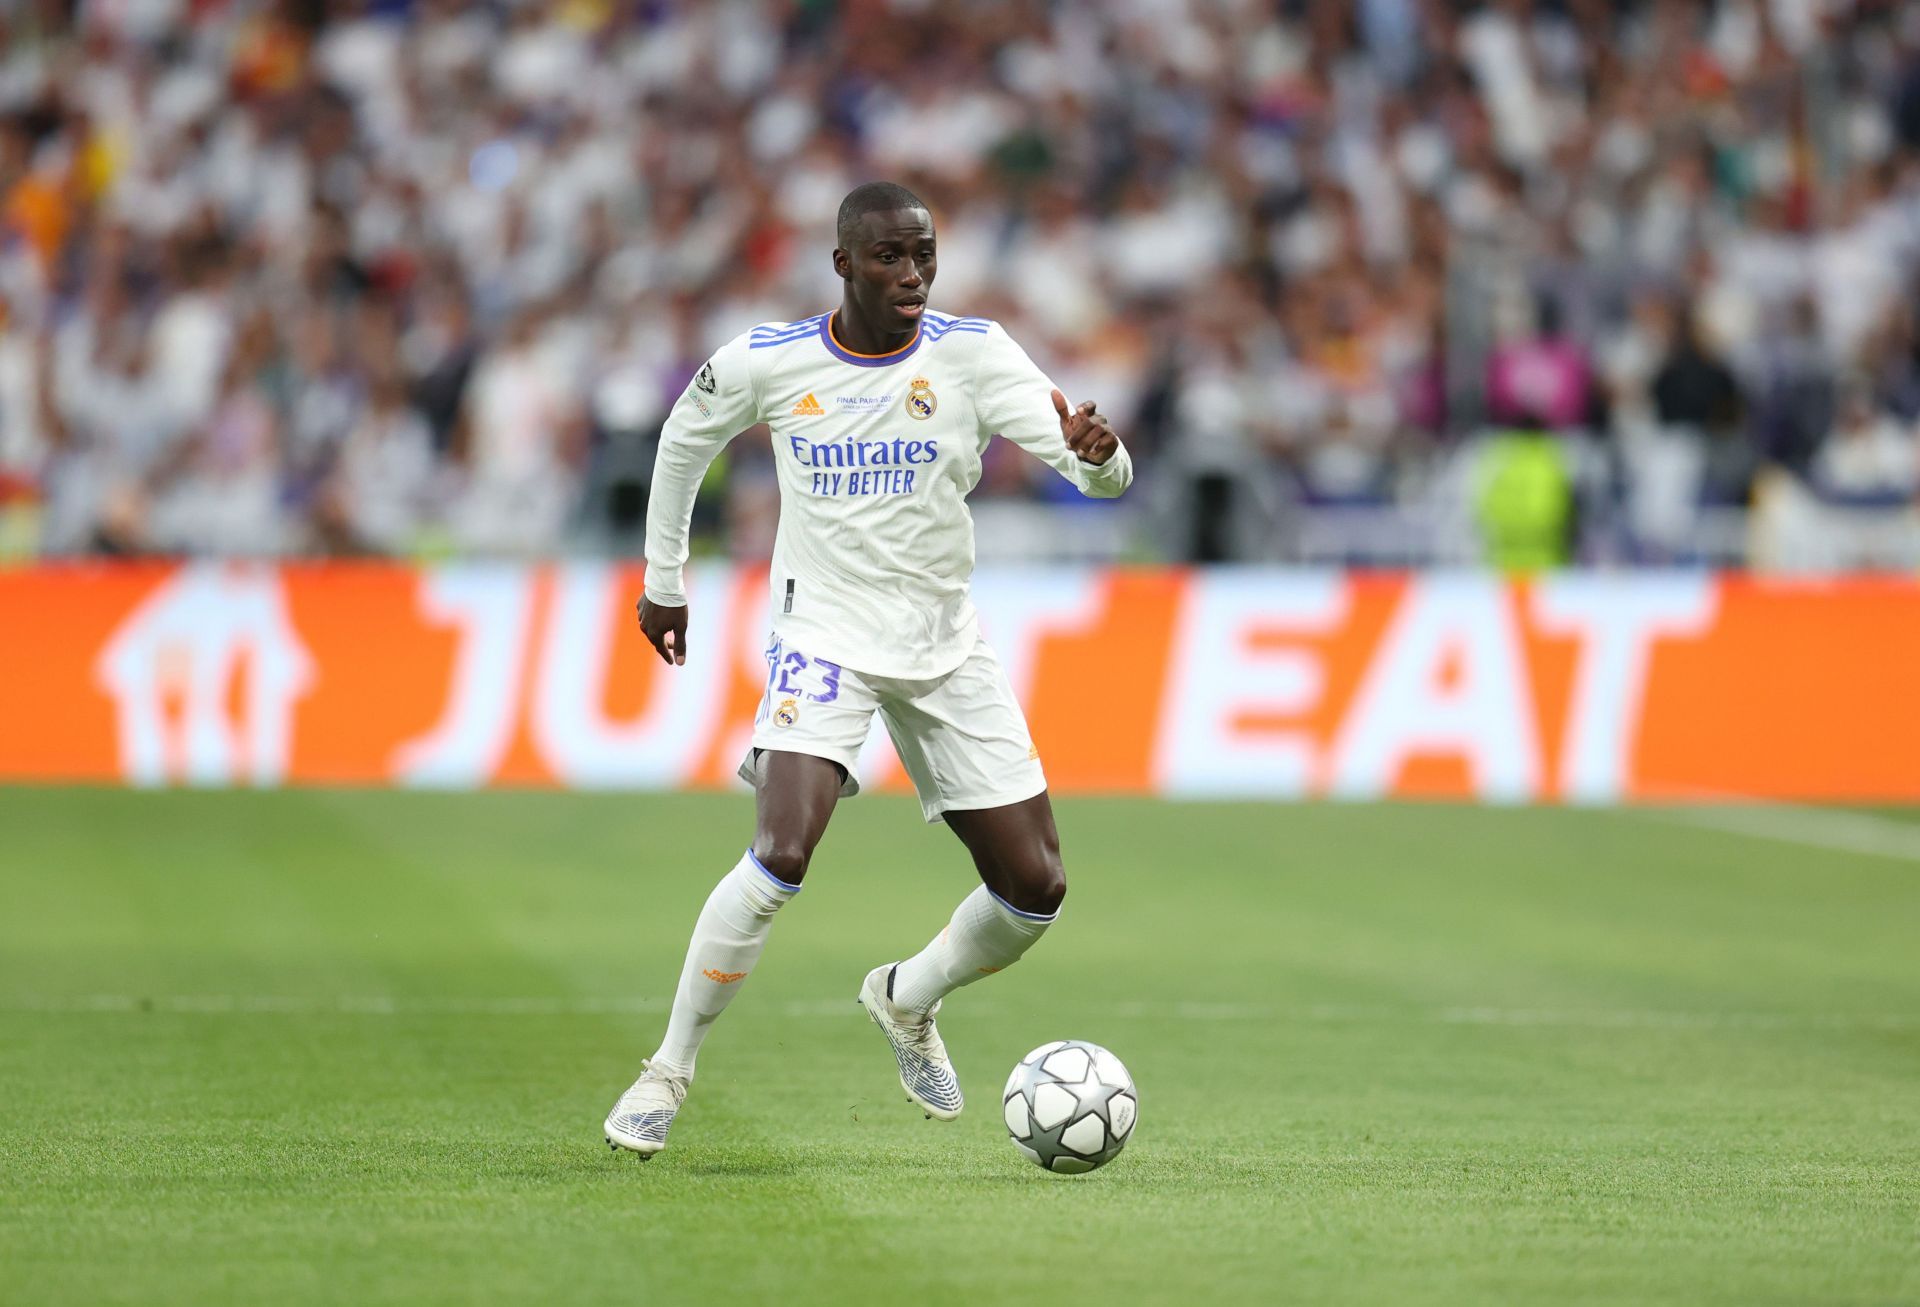 Mendy in action during the UEFA Champions League Final 2021/22